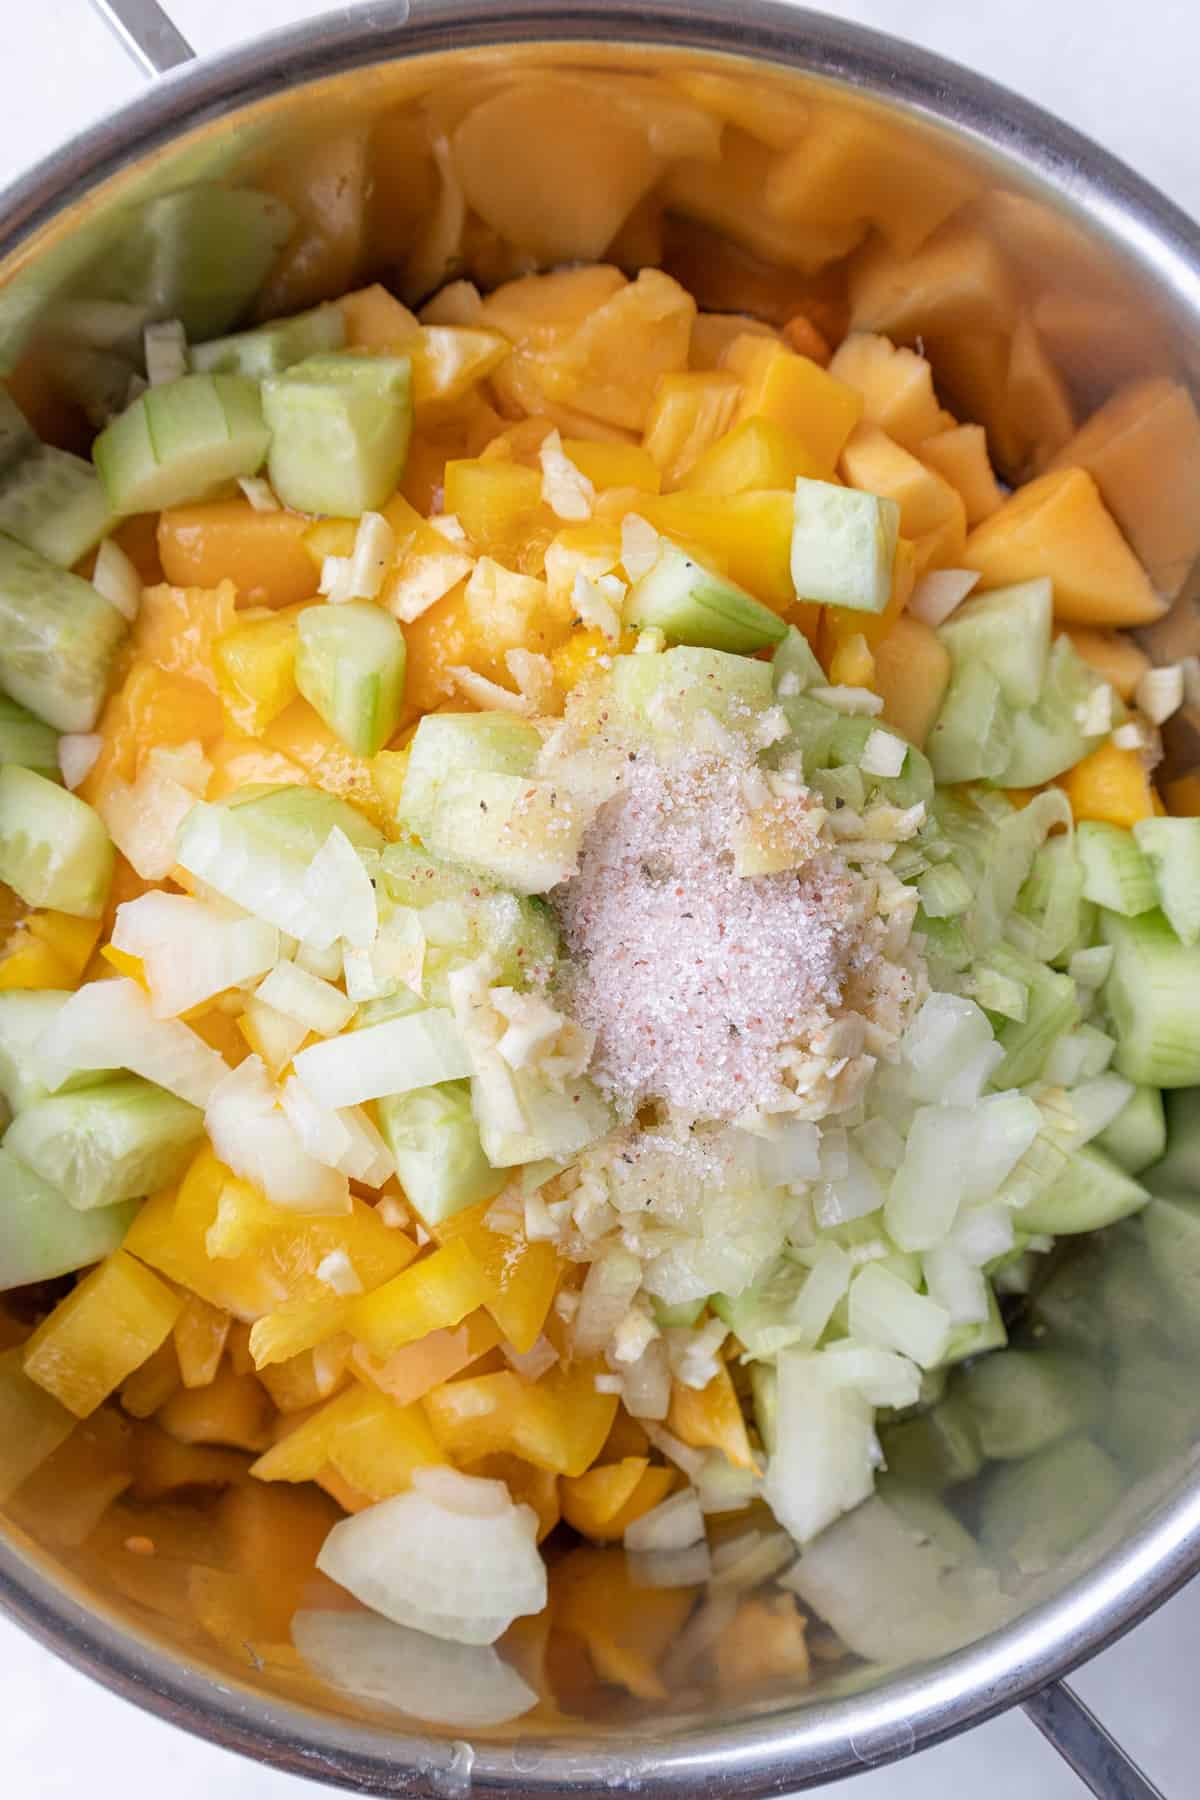 Combine all the mango gazpacho ingredients on a large pot